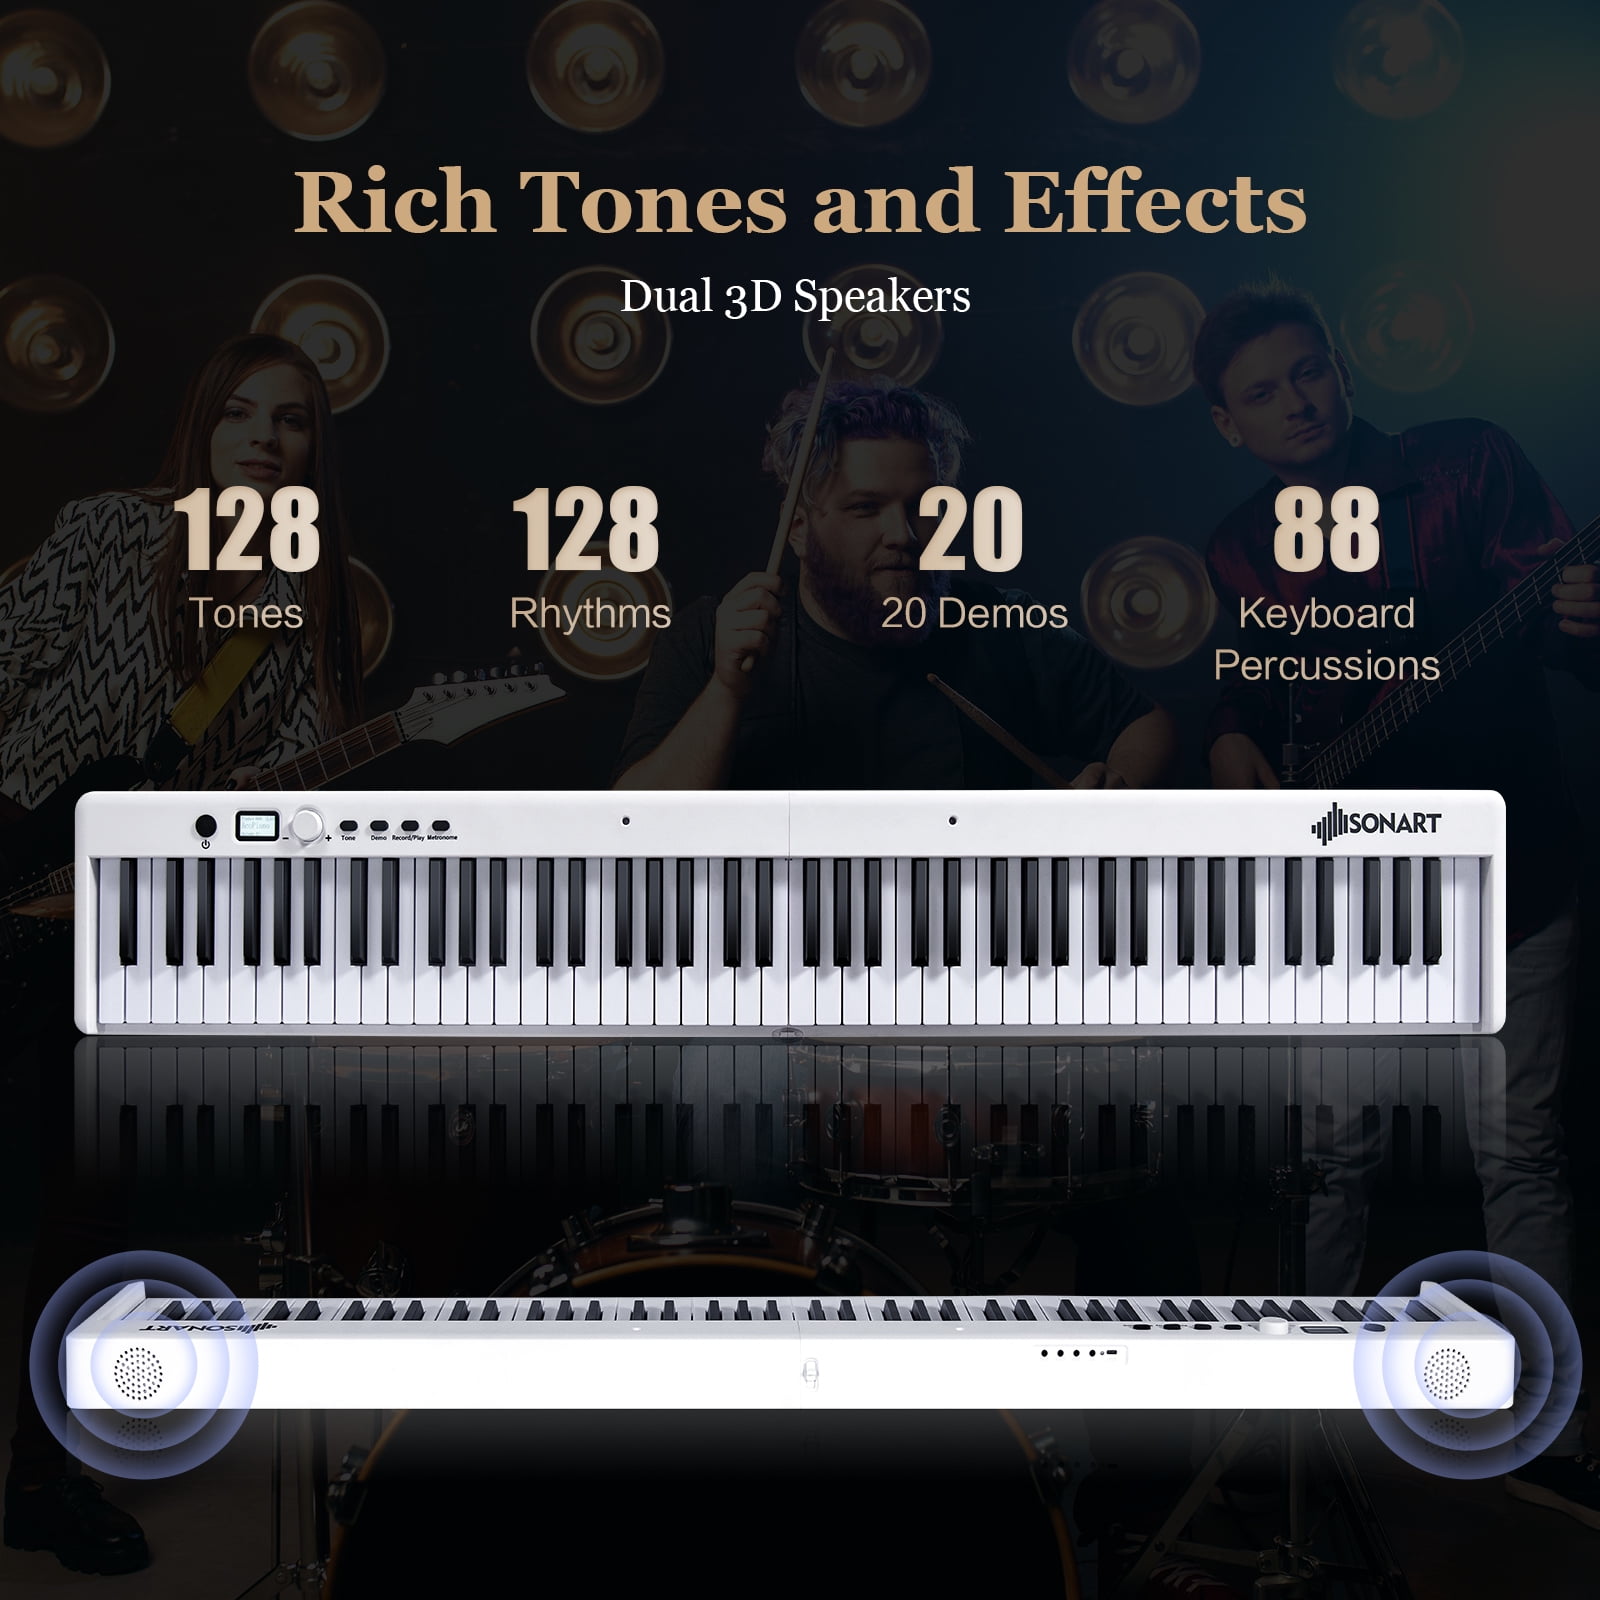 Foldable Instruments Musical Keyboard Stand Midi Controller Digital Piano  88 Key Weighted Teclado Infantil Electronic Organ